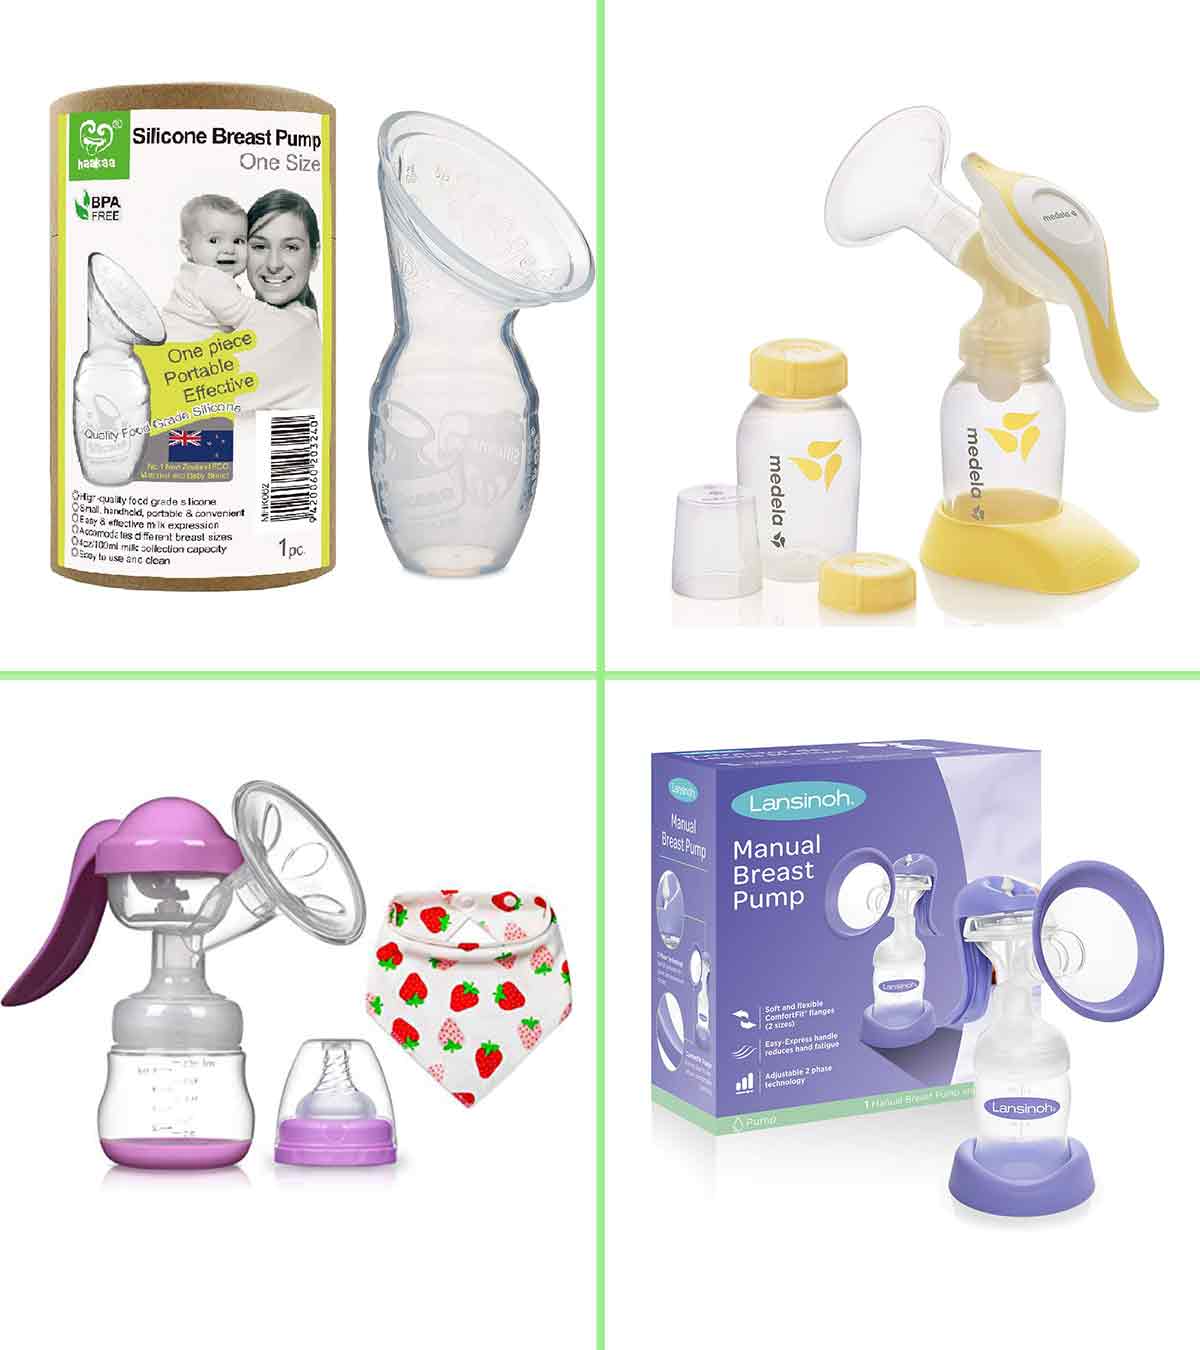 Compact Single Hand Breastpump Medela New Harmony Manual Breast Pump with Flex Breast Shield and 100 Count Breast Milk Storage Bags Ready to Use Breastmilk Bags for Breastfeeding 